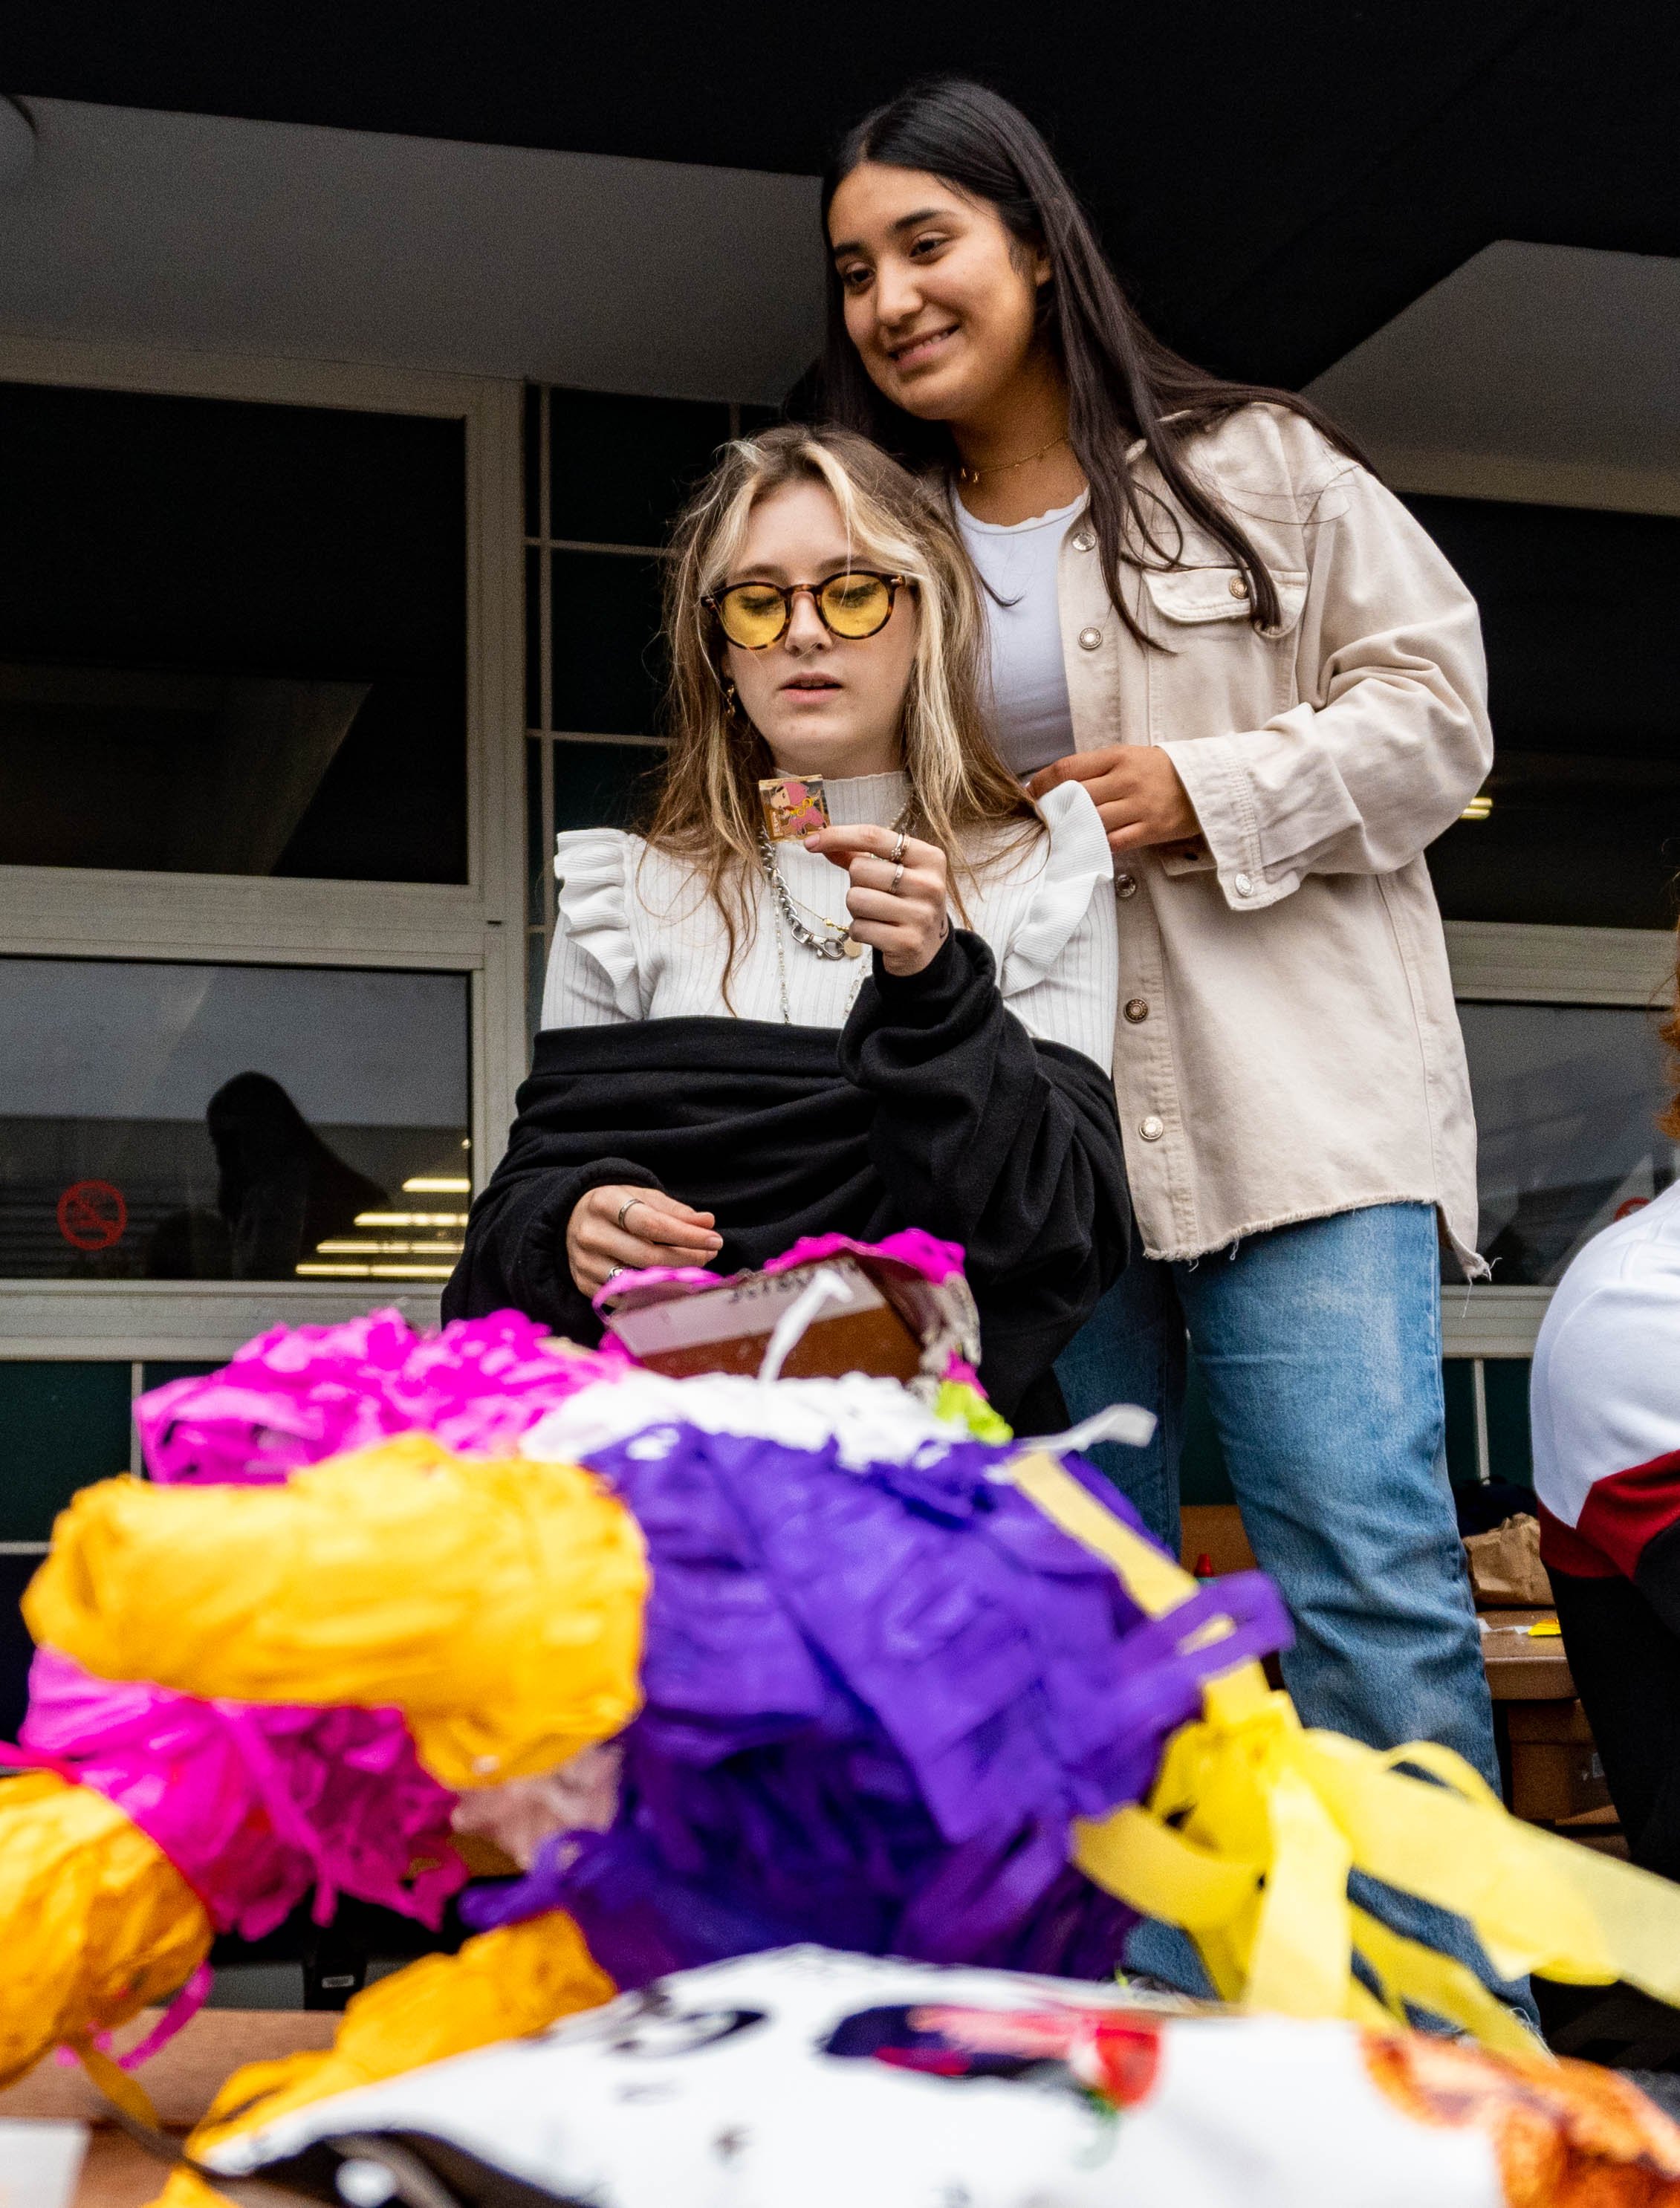  Abril Olivares Nolasco, President of the Santa Monica College International Student Forum (ISF) stands with ISF member Andrea Giraldo in front of the broken pinata during Snacks Appreication Day on Oct. 5, 2022. Santa Monica, Calif. (Ee Lin Tsen | T